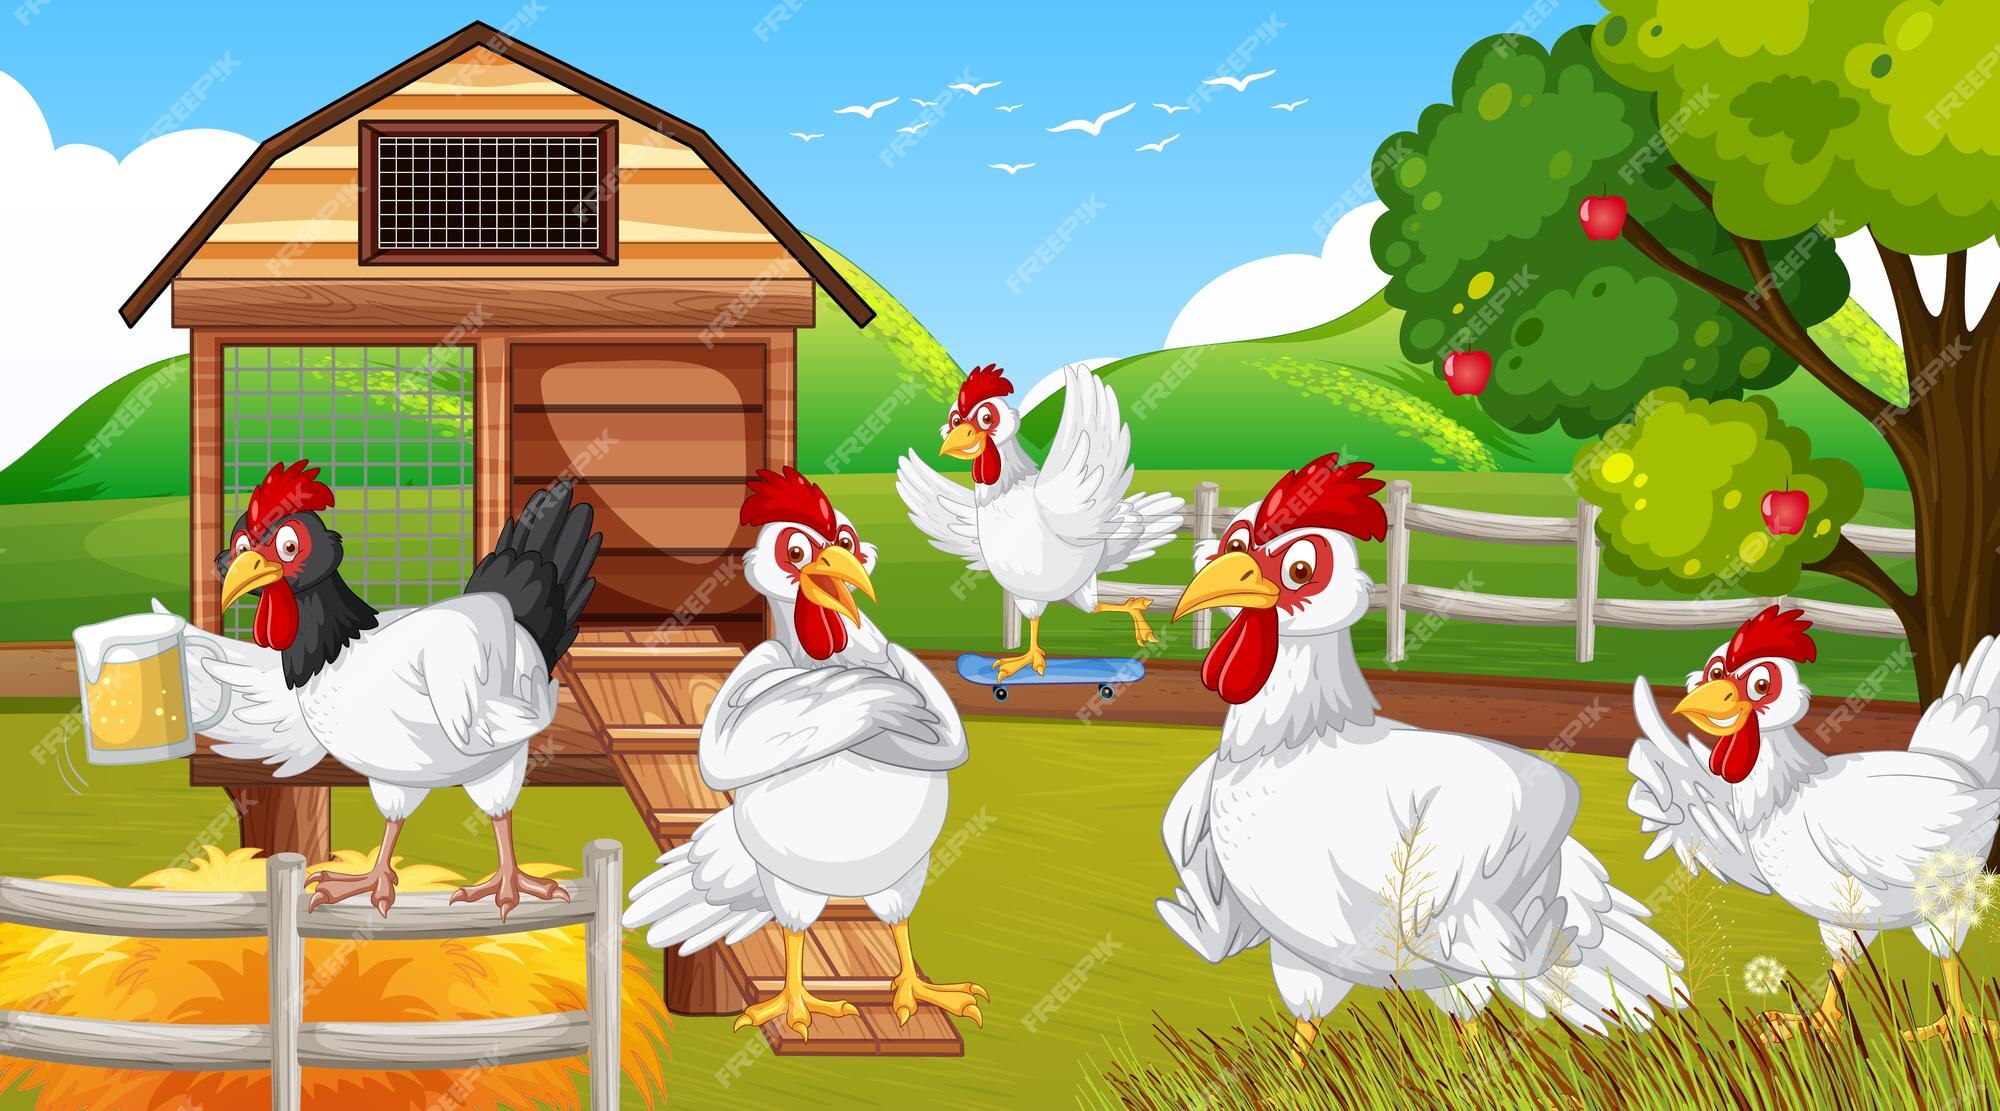 Free Vector | Chickens cartoon characters in nature farm scene